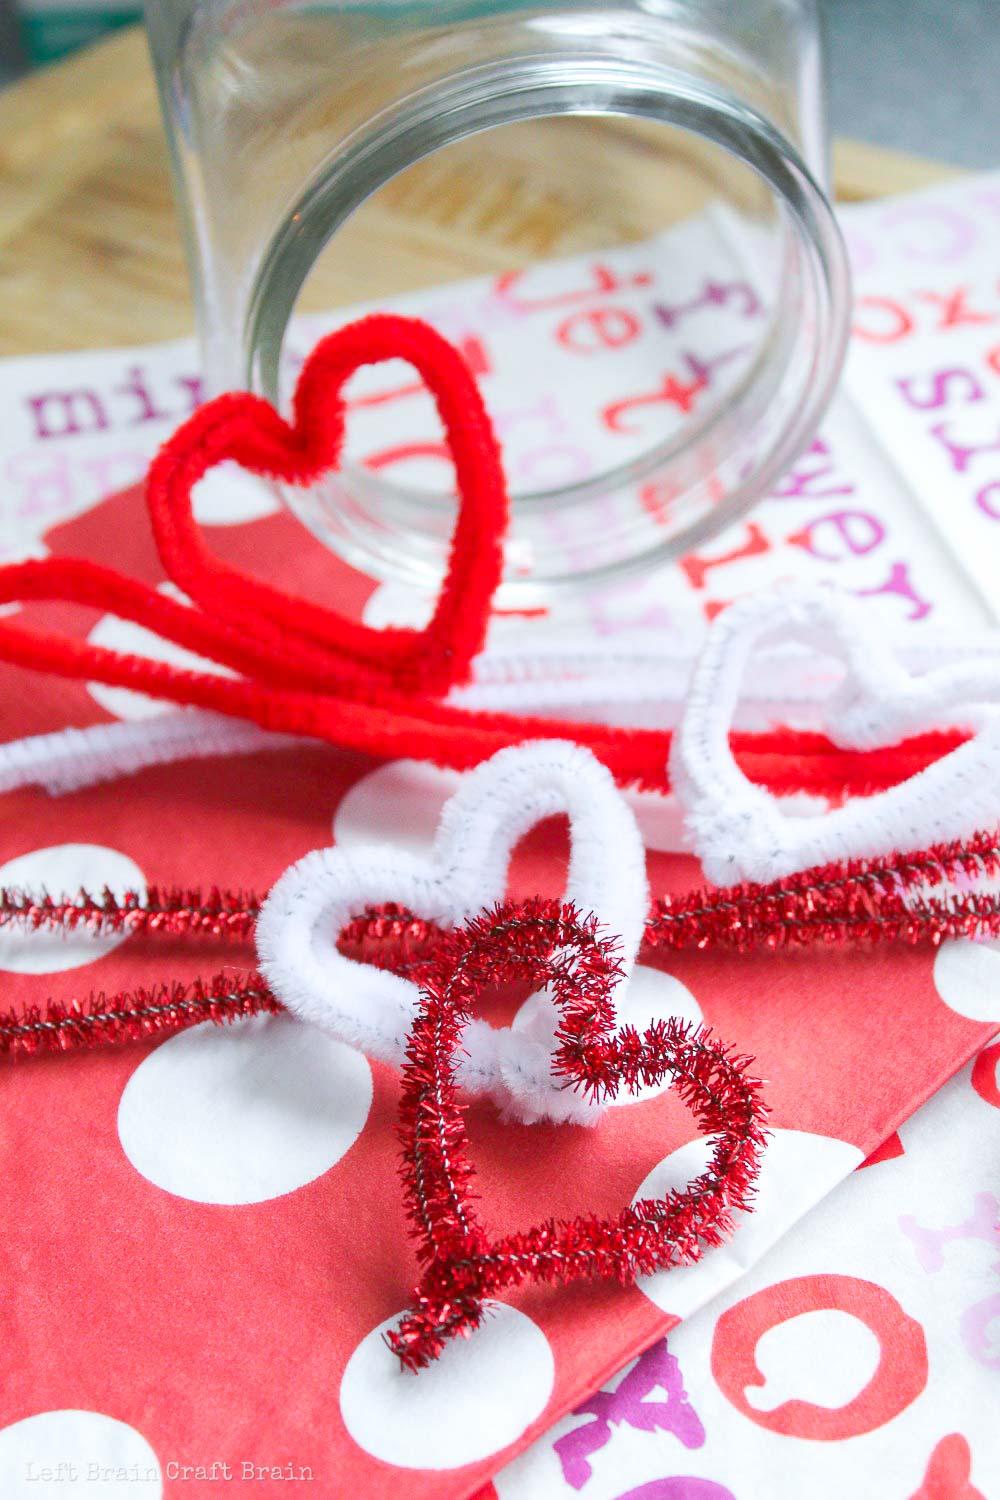 Form the pipe cleaner hearts